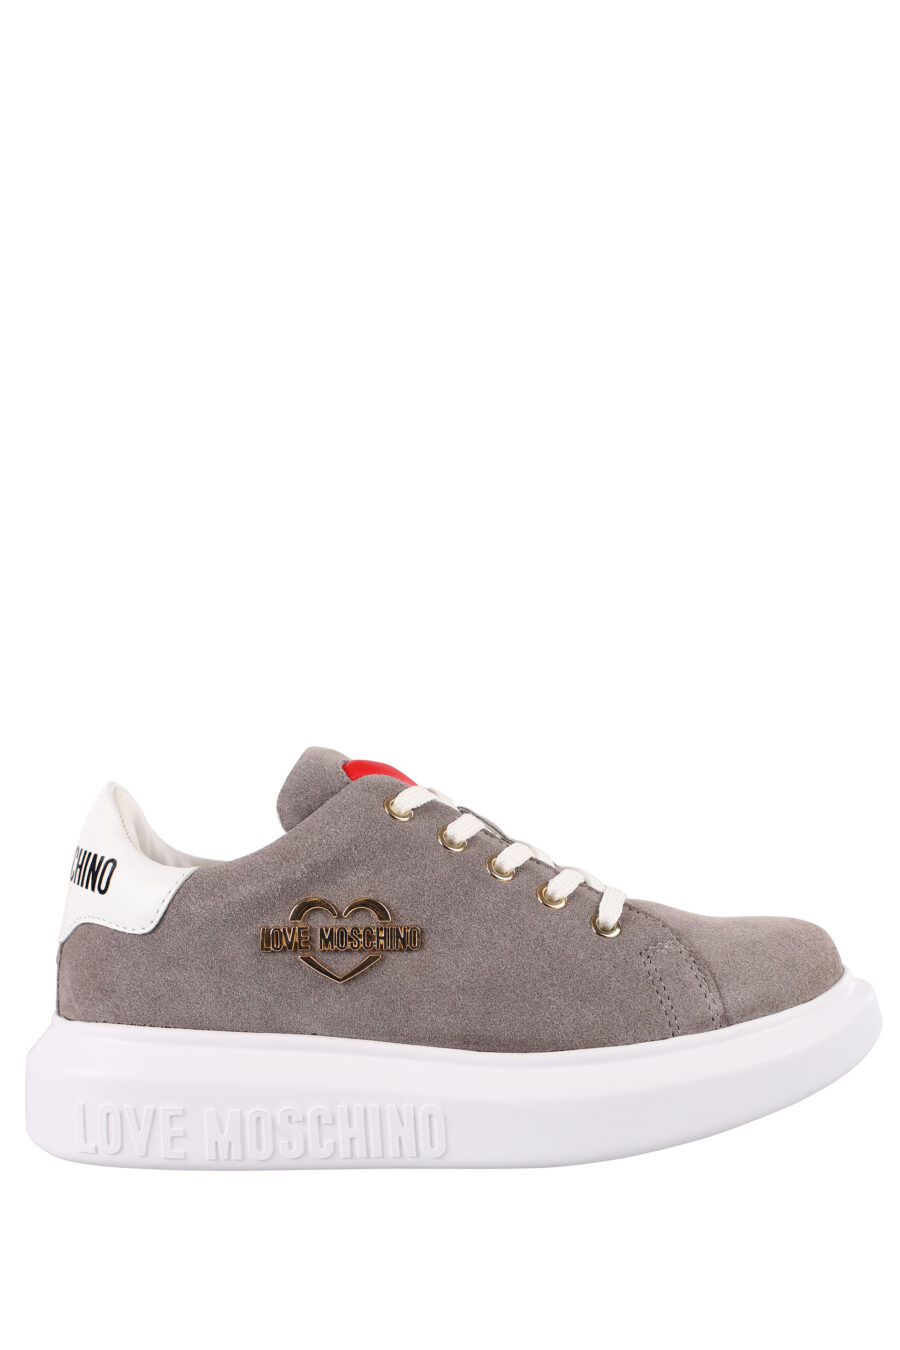 Grey trainers with gold metal logo and white sole - IMG 1180